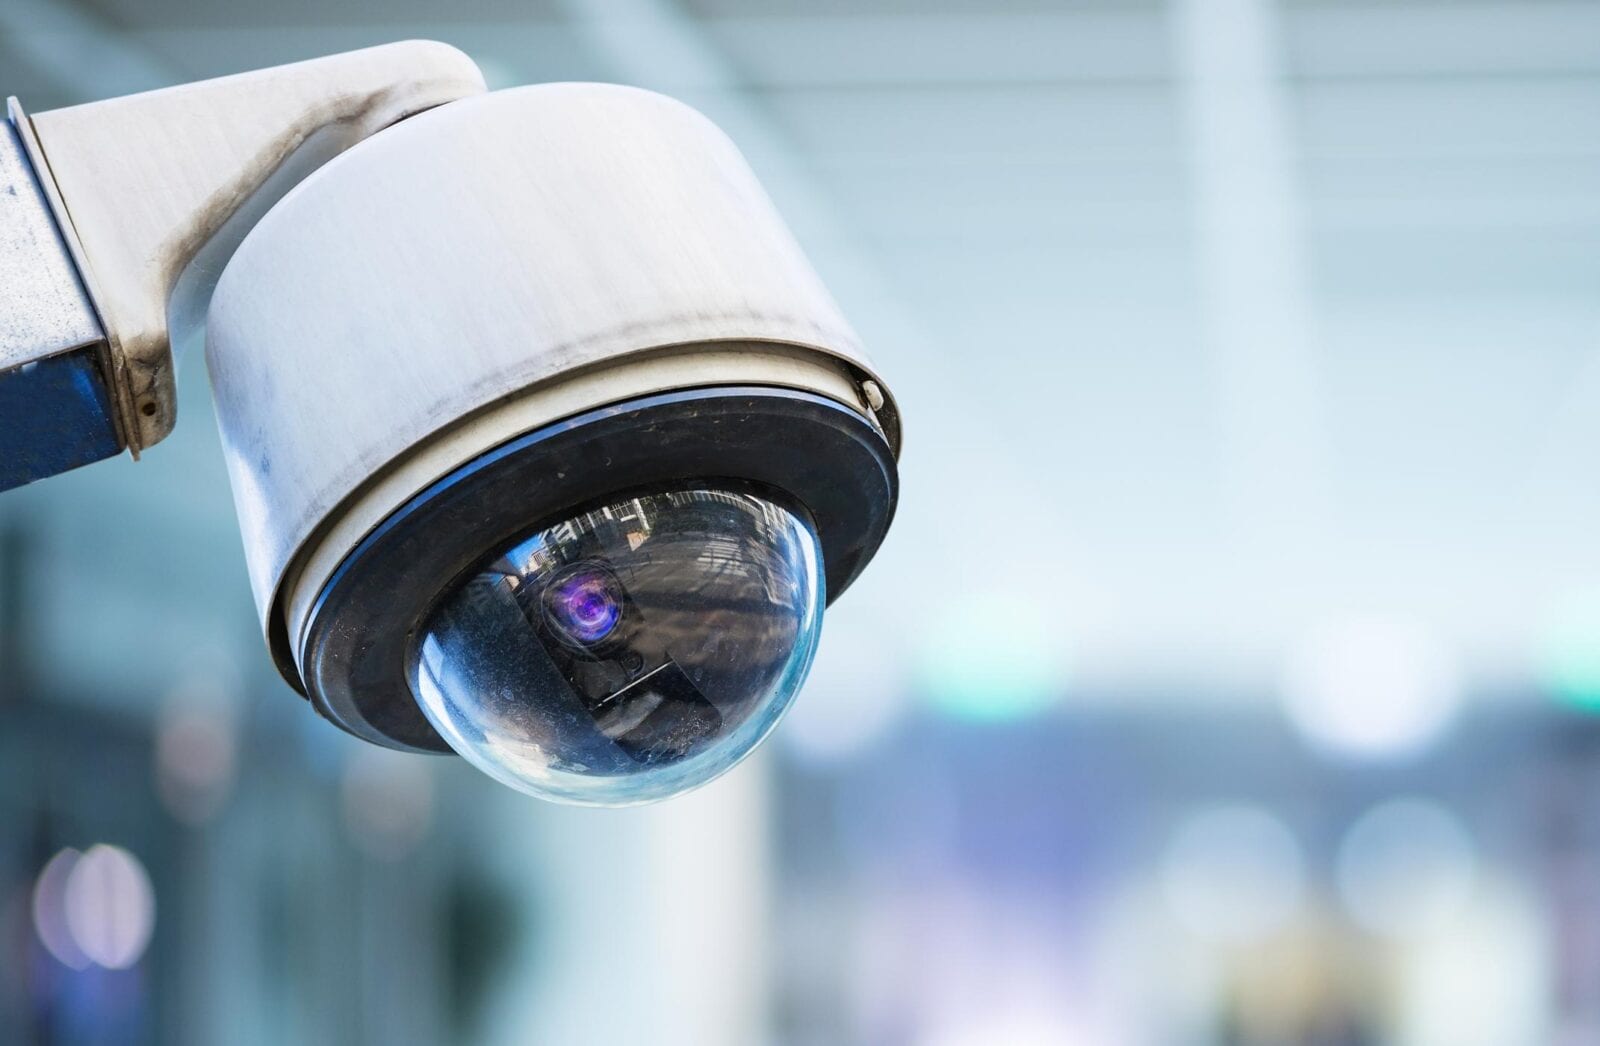 There are now 40,000 CCTV cameras in operation across Manchester, The Manc